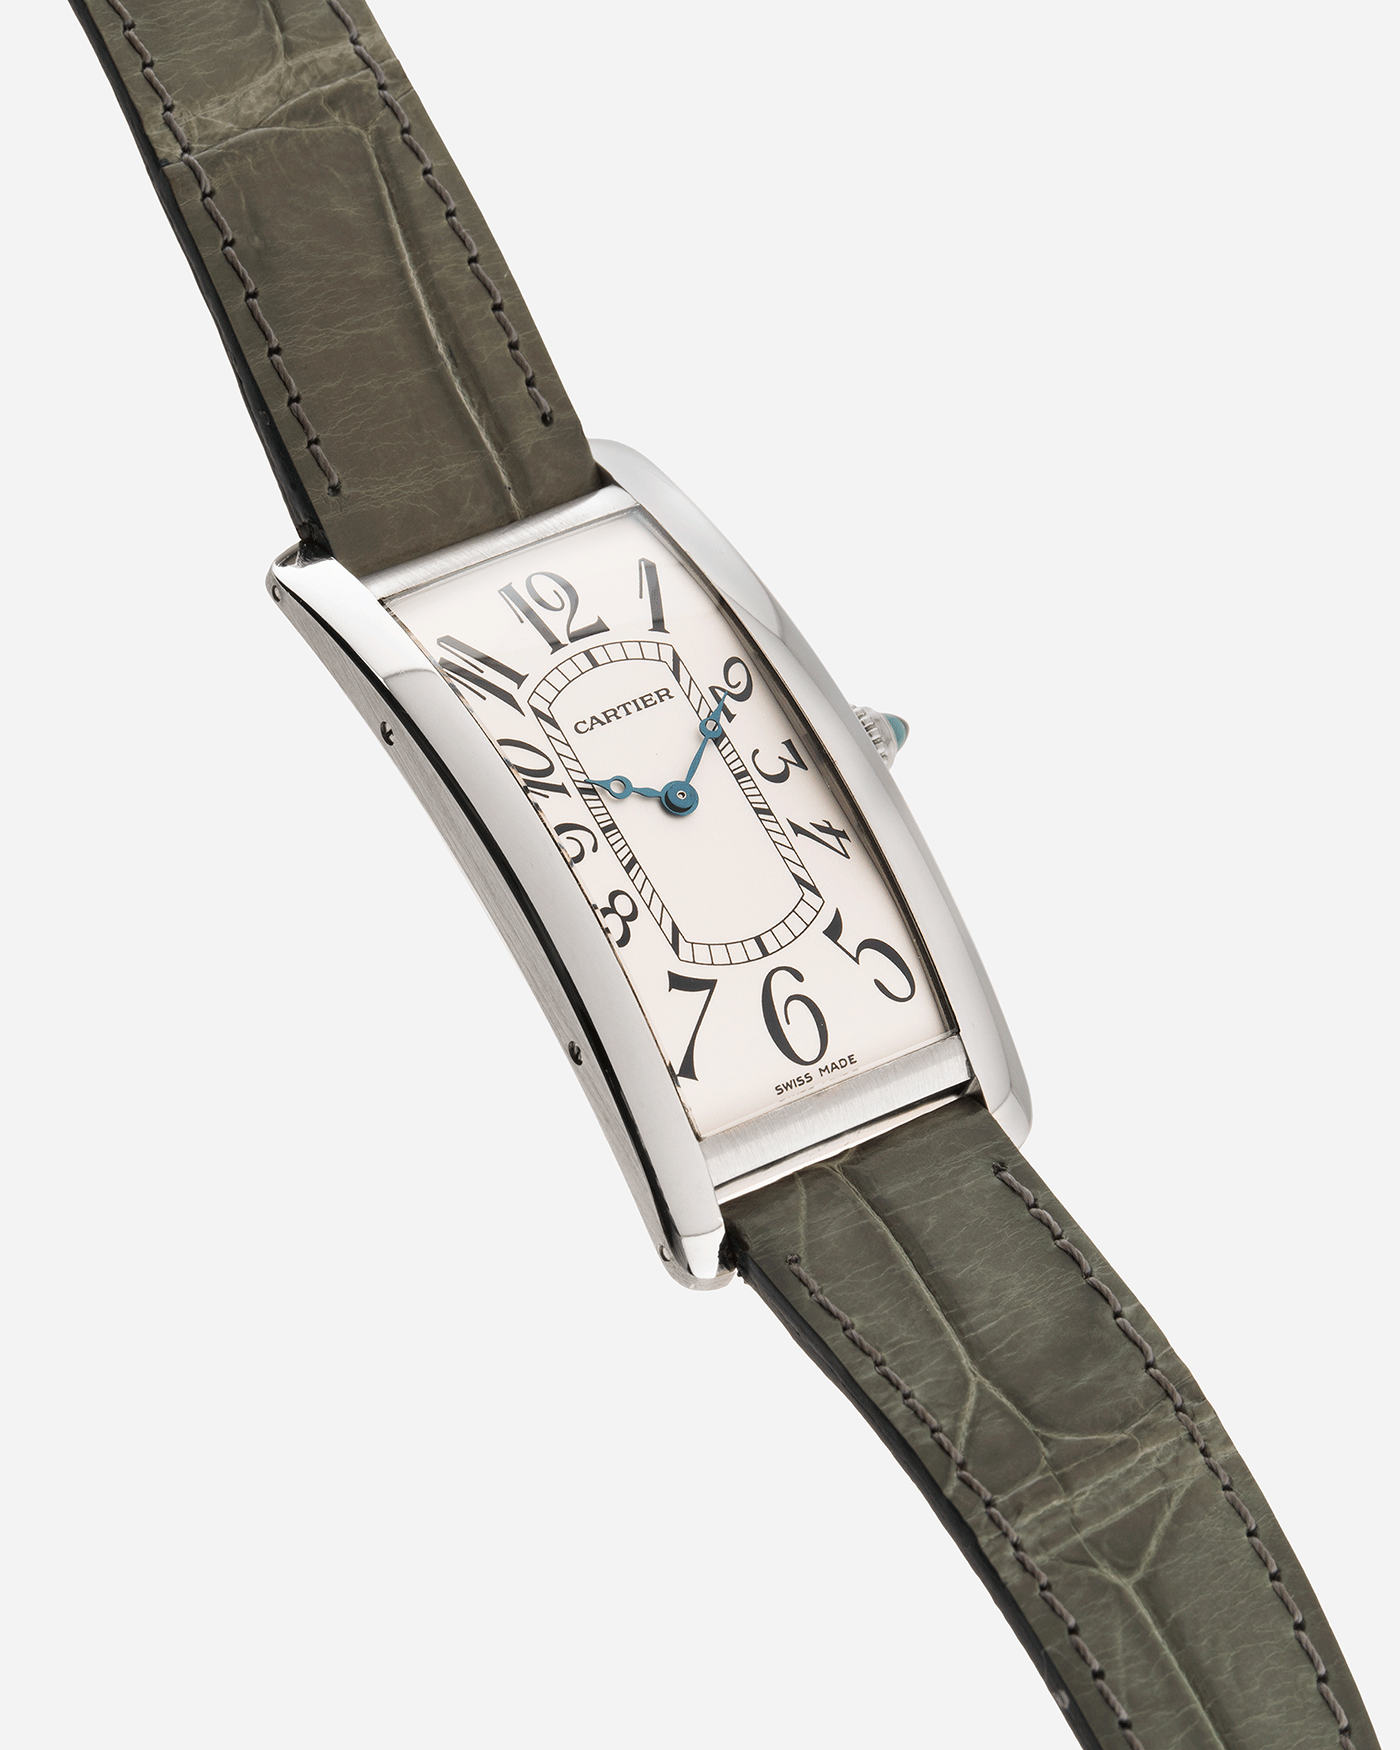 Brand: Cartier Year: 2005 Model: CPCP Collection Prive Tank Cintree Reference: 2843 Material: Platinum Movement: Jaeger Le Coultre manual wind caliber 9770MC Case Diameter: 46 x 23 mm Strap: Moss Green Alligator Strap with Platinum Cartier Deployant Clasp